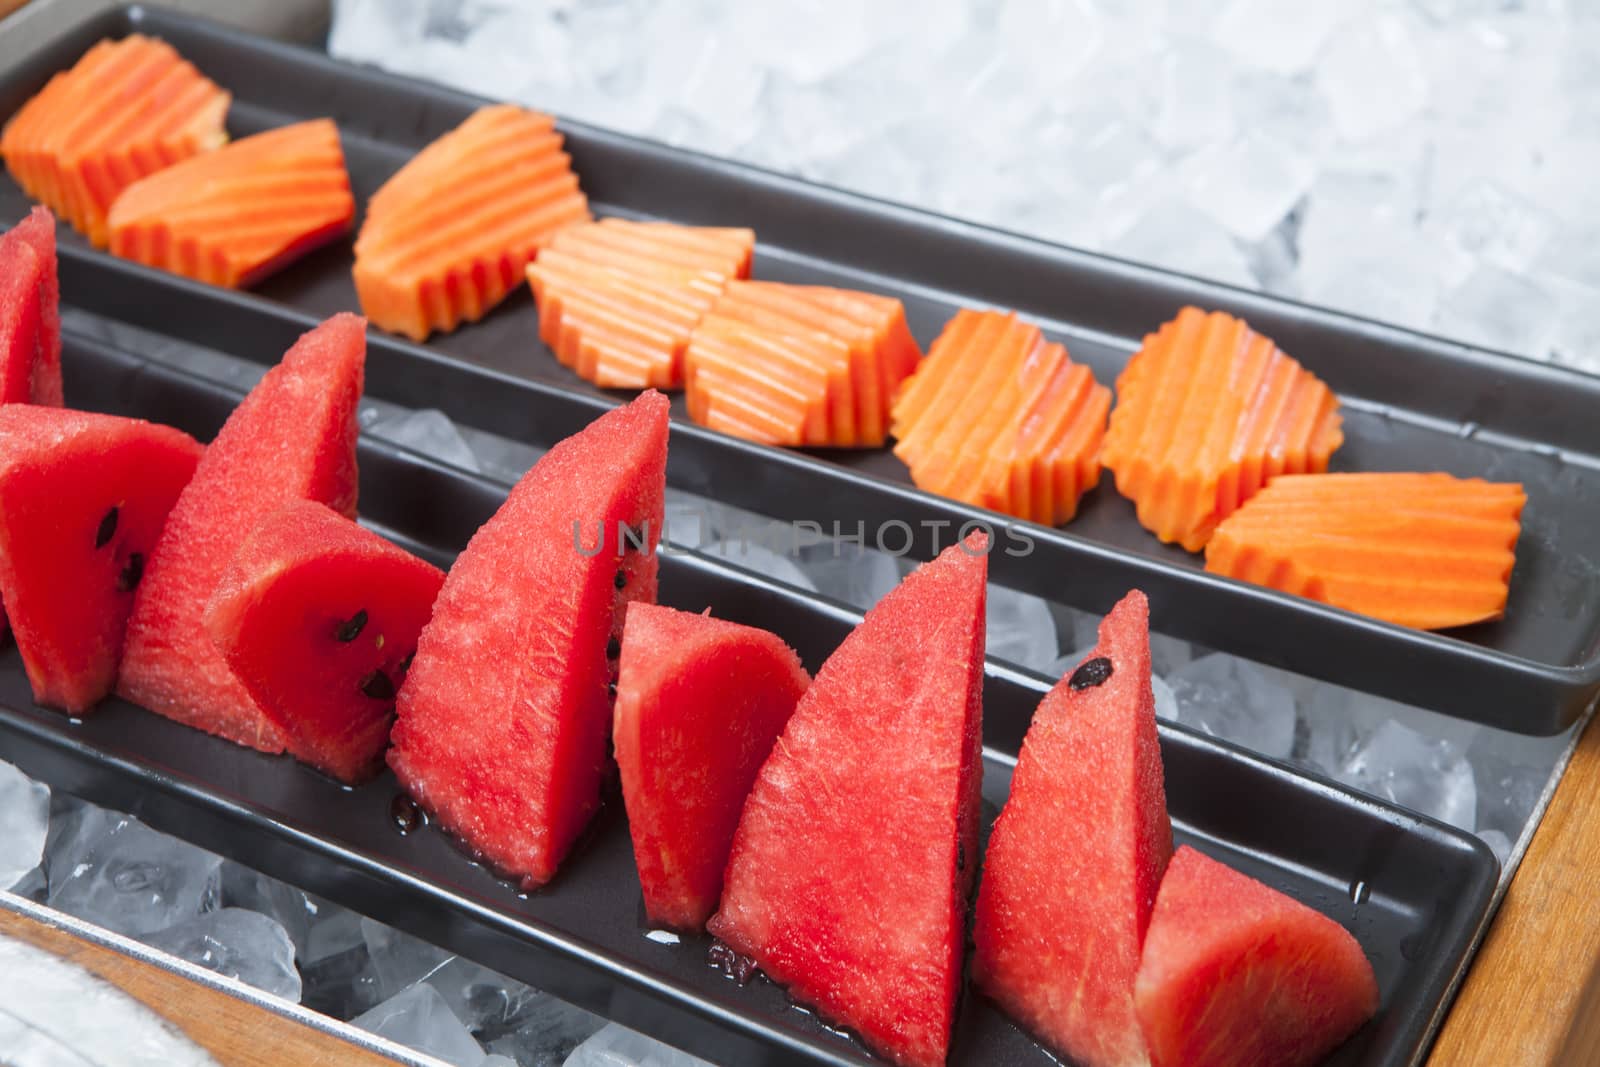 Watermelon, papaya and put on a container ready for breakfast.